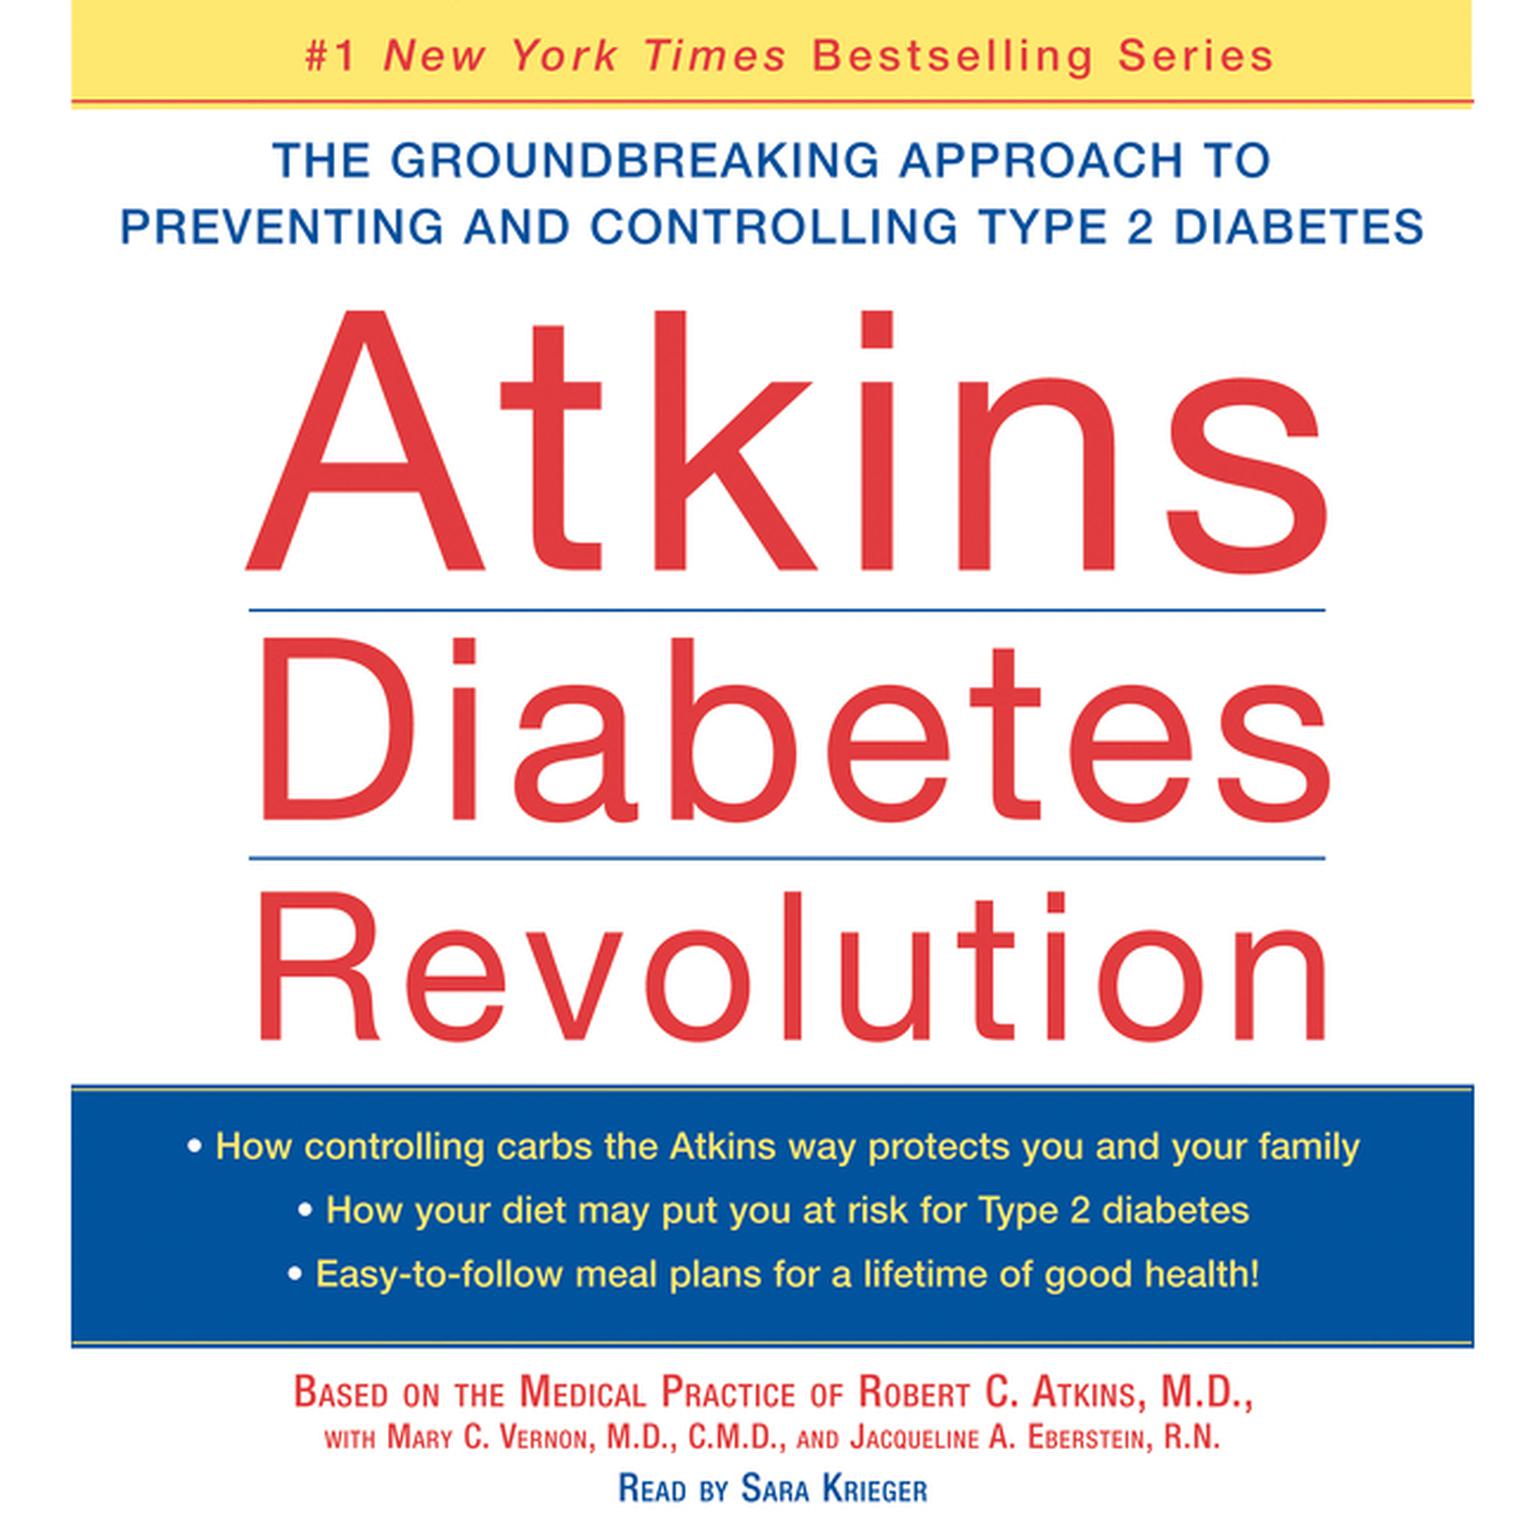 Atkins Diabetes Revolution (Abridged): The Groundbreaking Approach to Preventin Audiobook, by Robert C. Atkins